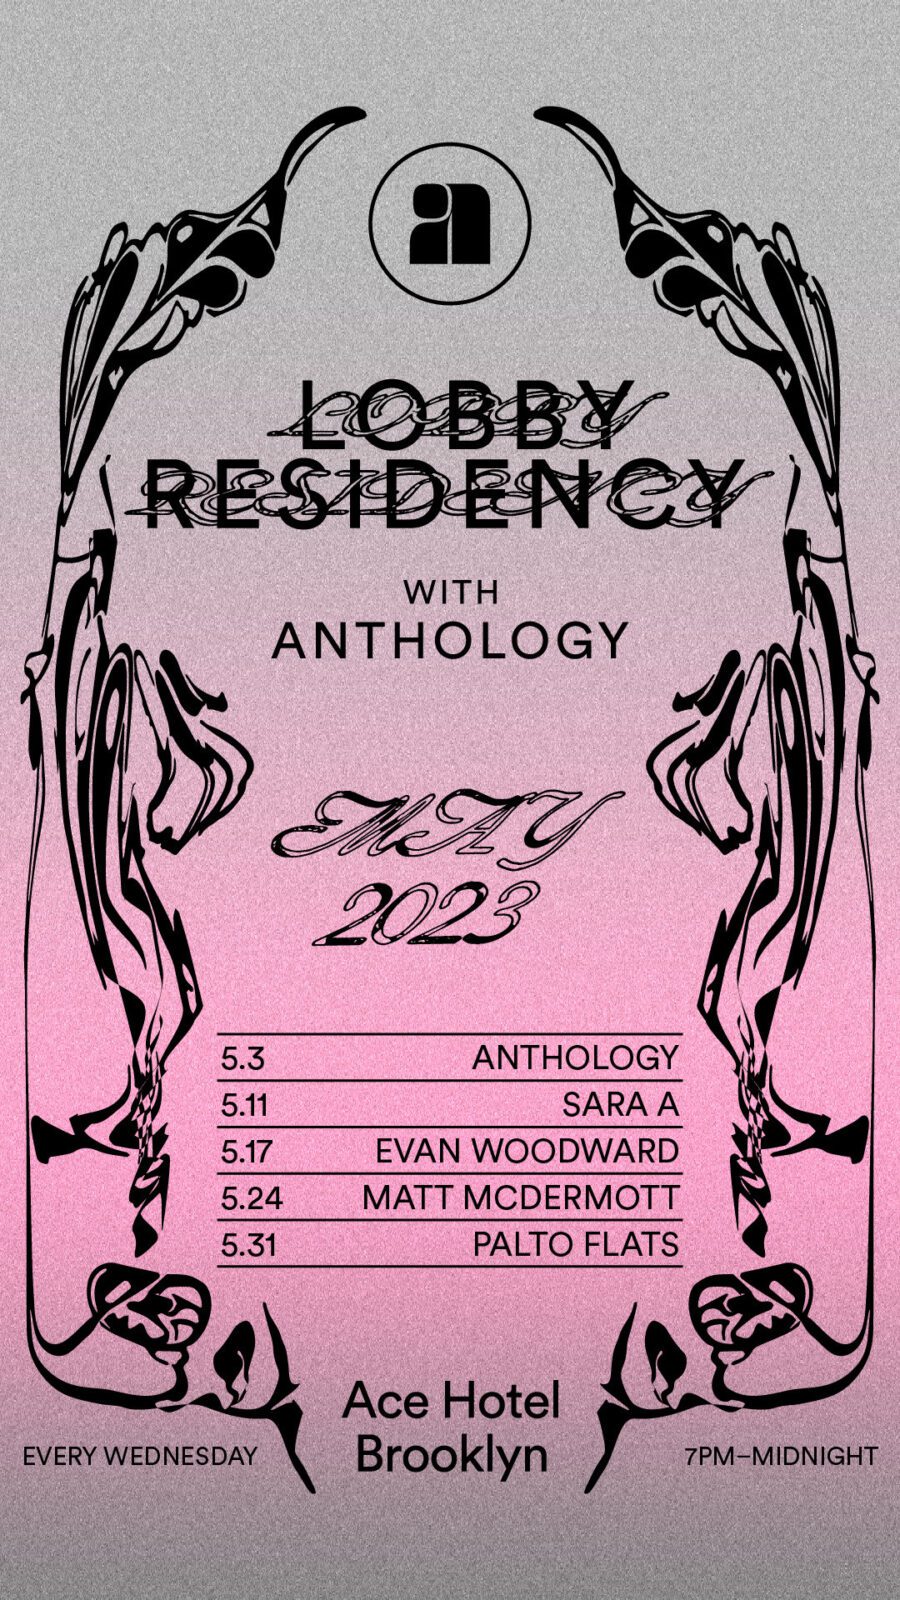 Lobby Residency with Anthology